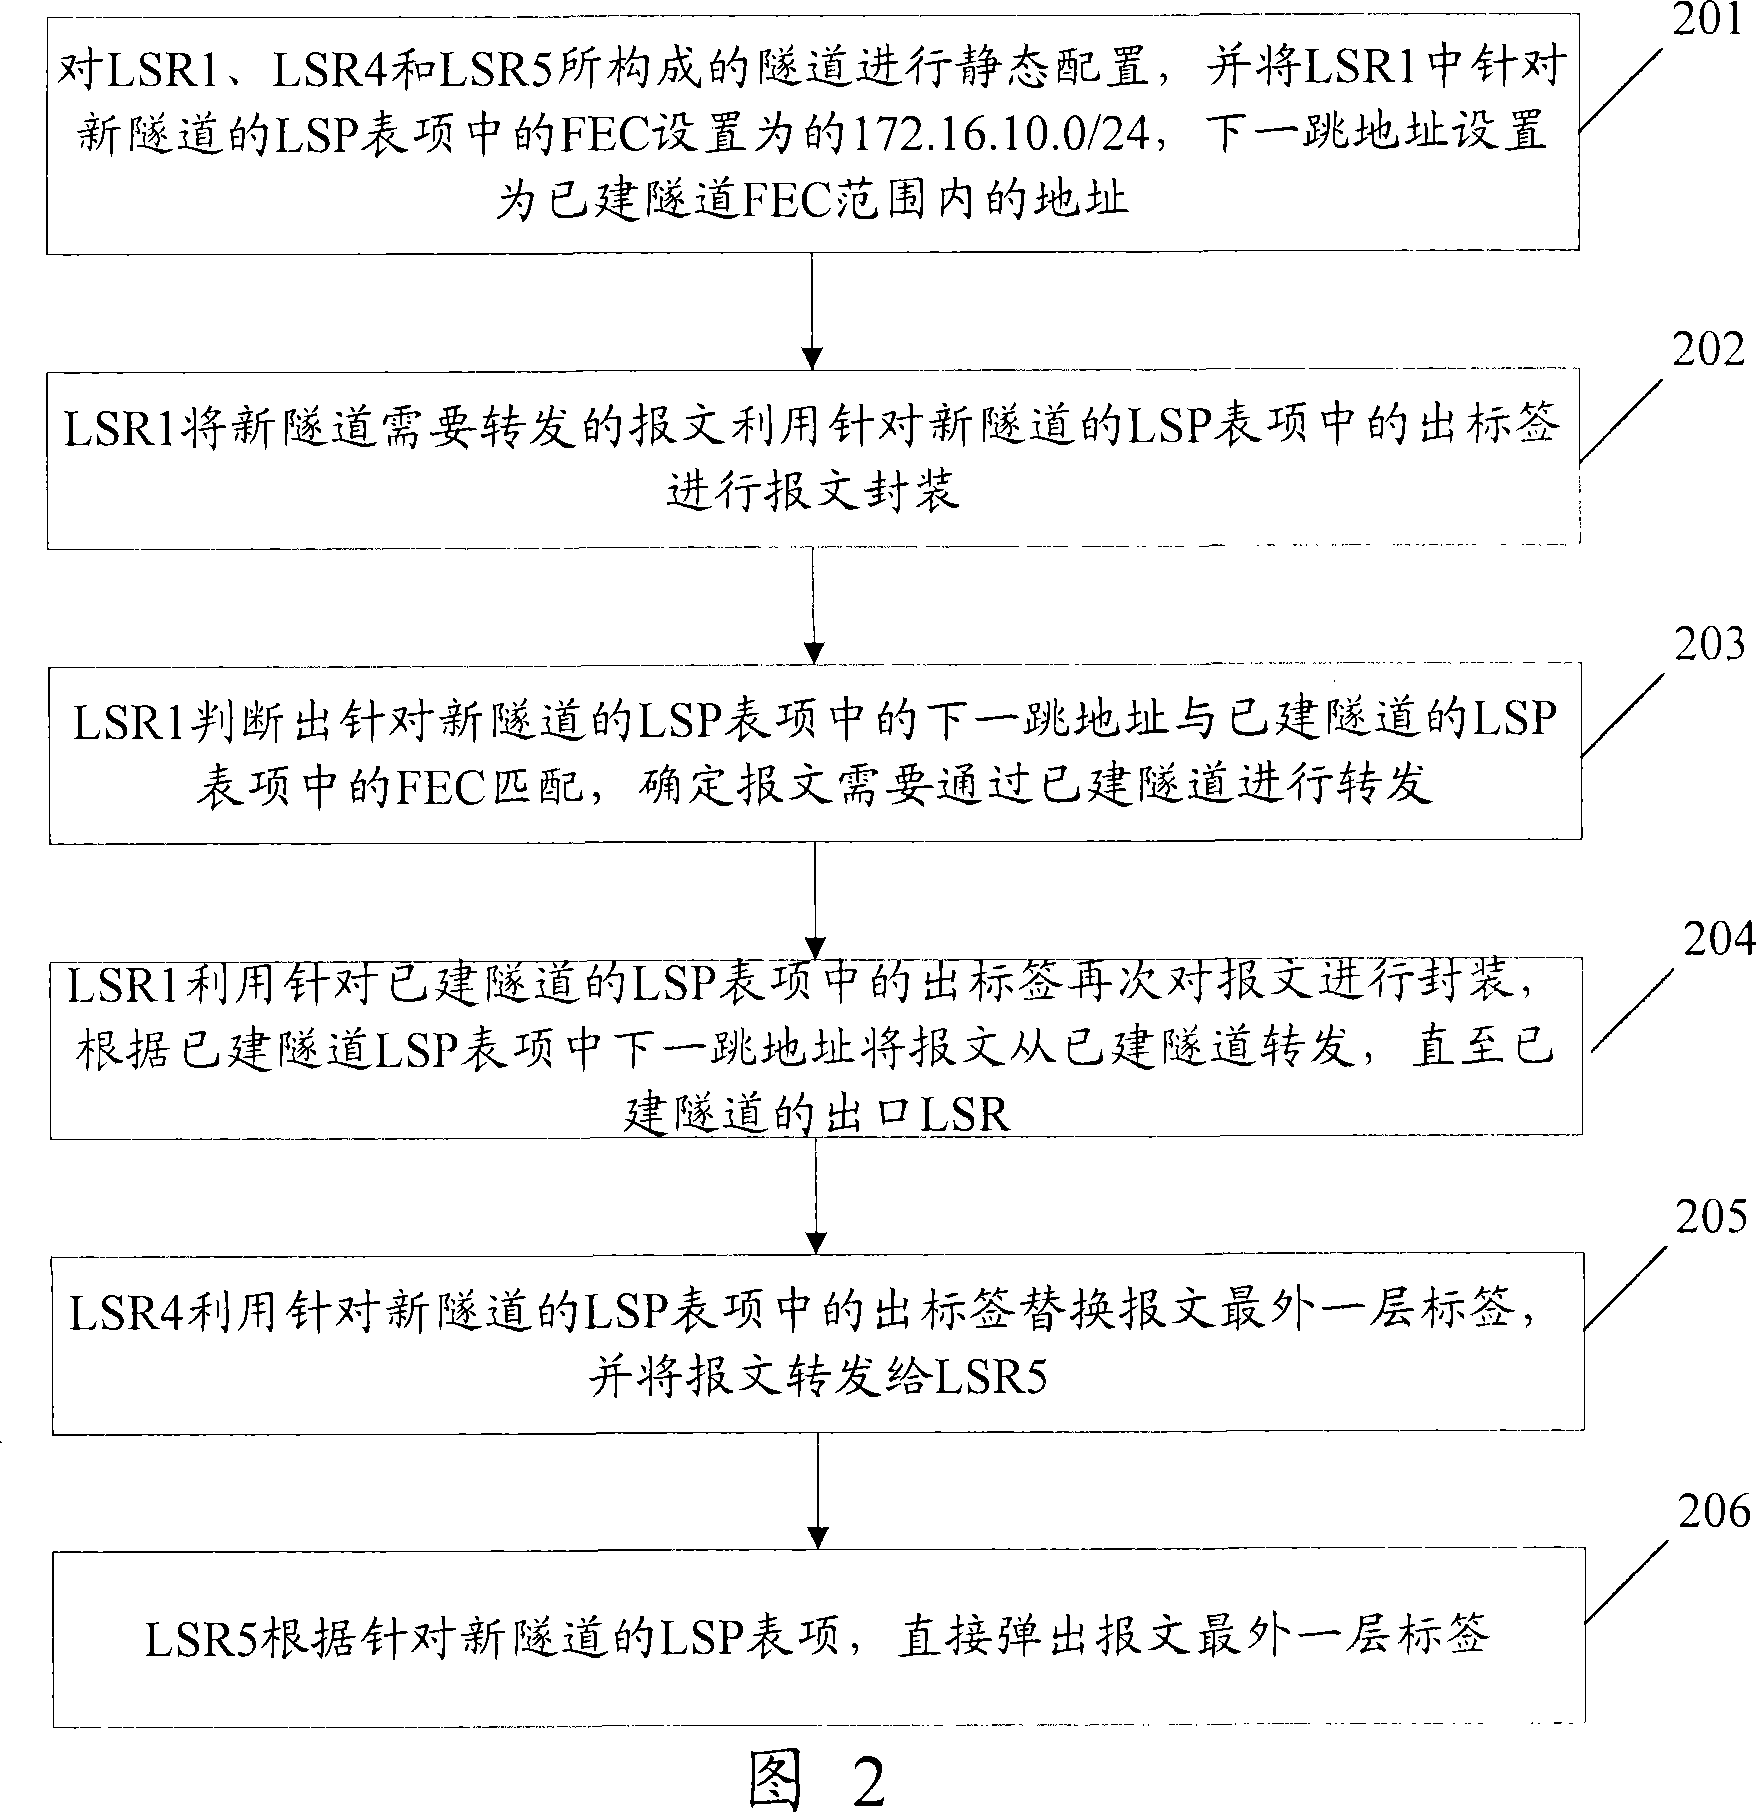 Tunnel-based message forwarding method and label exchange router